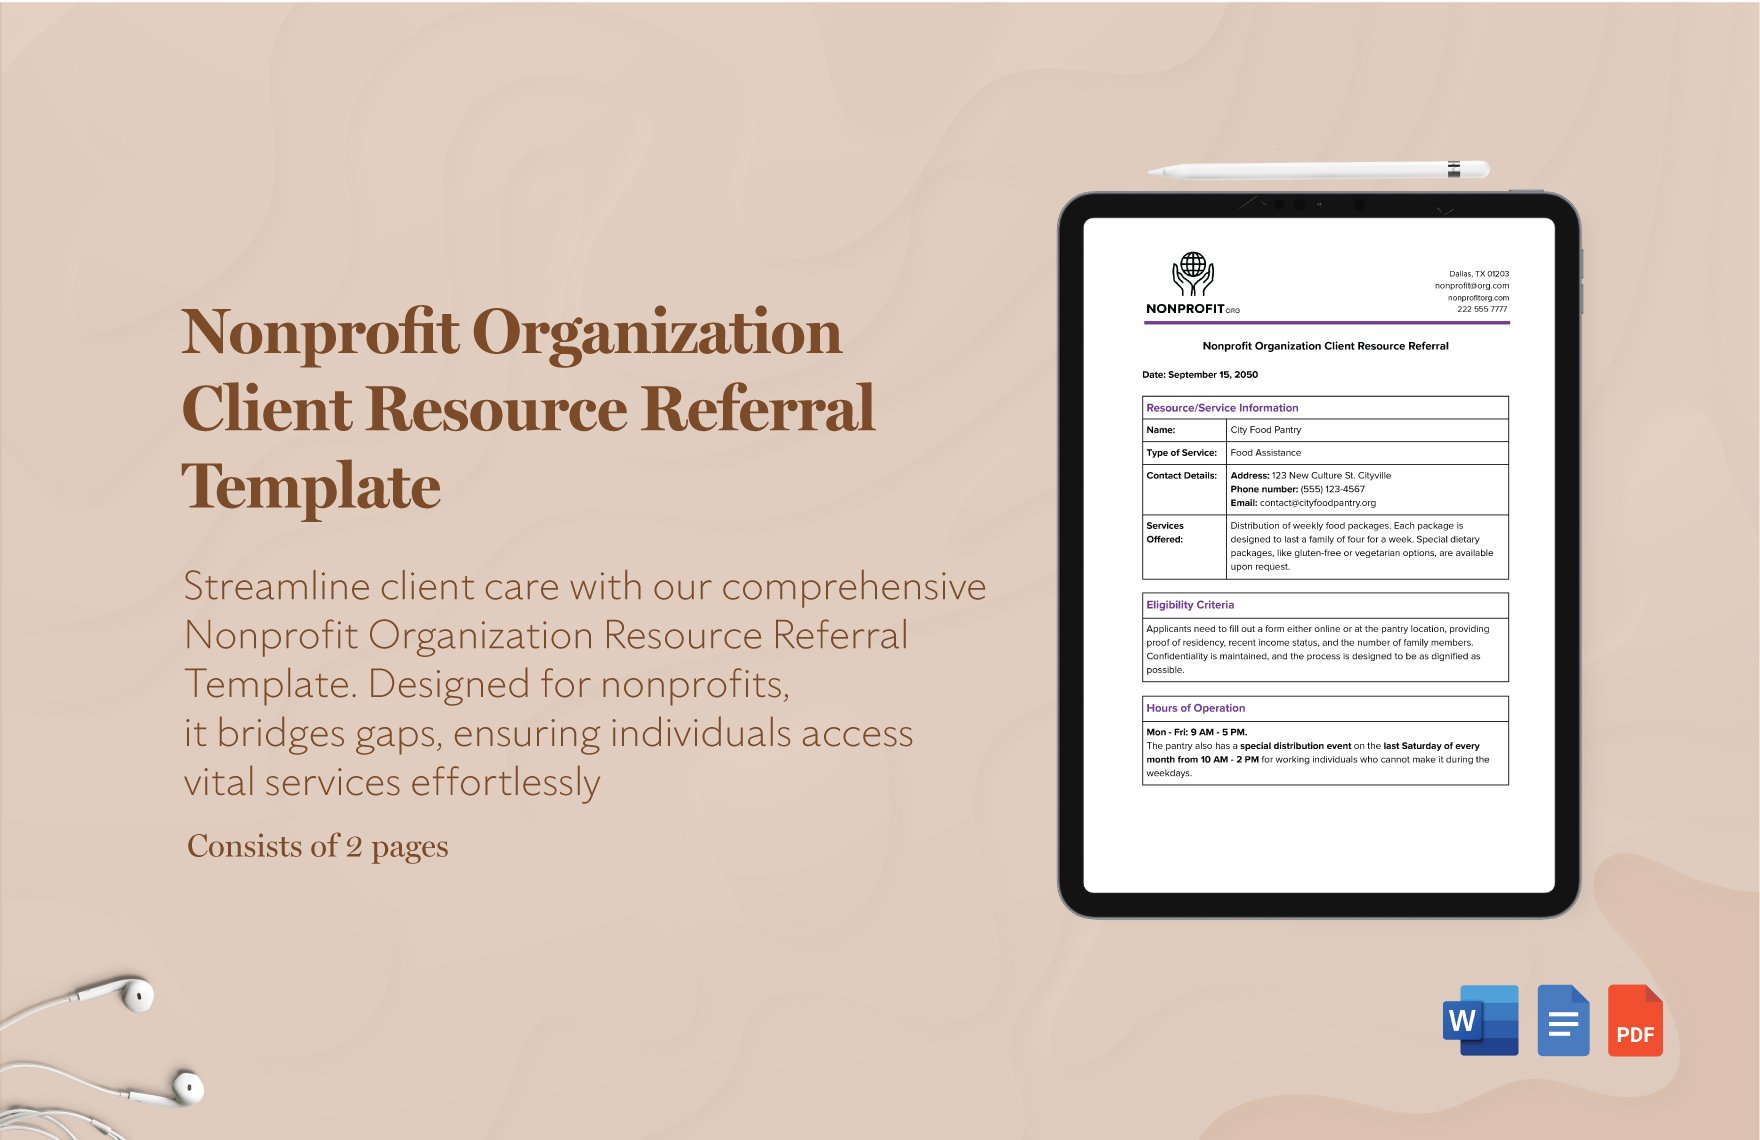 Nonprofit Organization Client Resource Referral Template in Word, Google Docs, PDF